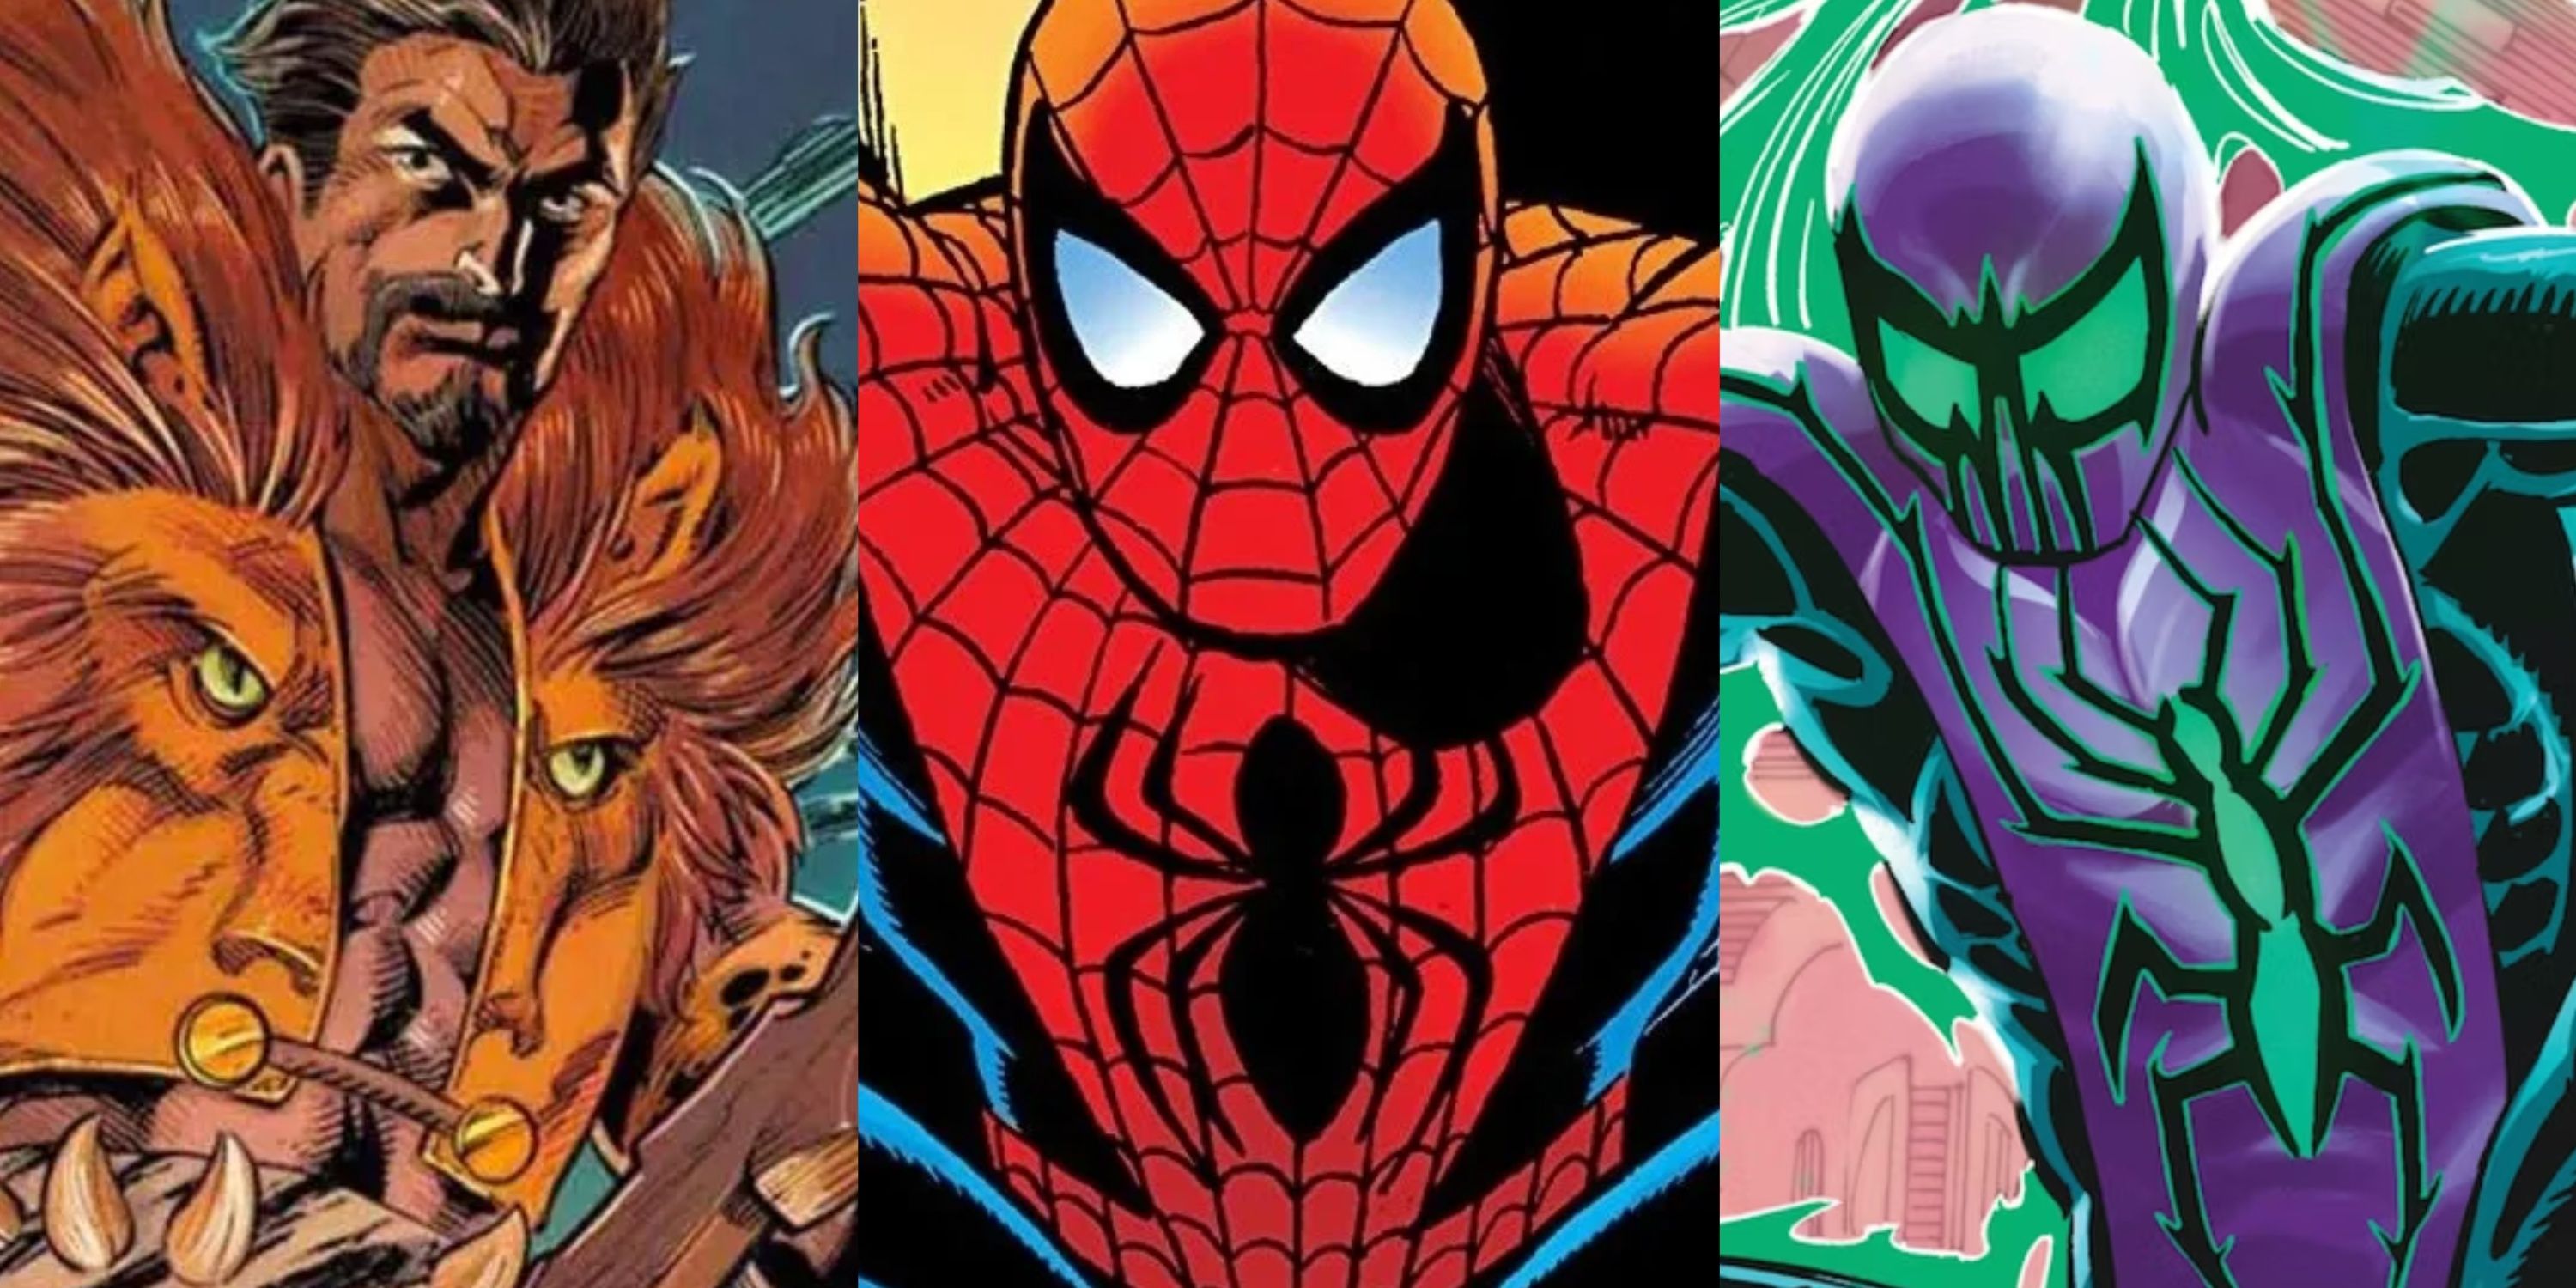 Split image of Kraven, Spider-Man and Chasm feature